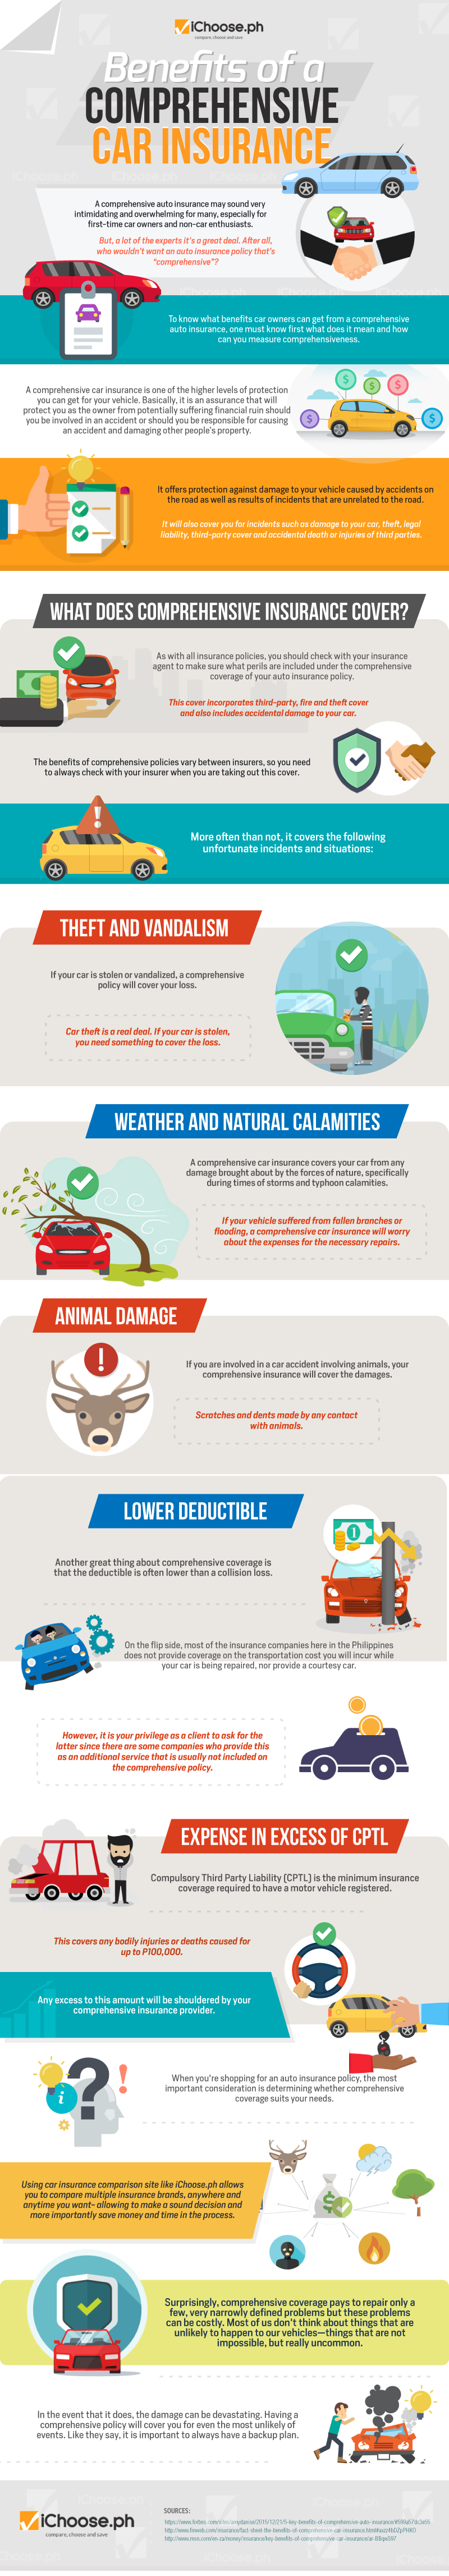 Benefits of a Comprehensive Car Insurance [Infographic] | iChoose